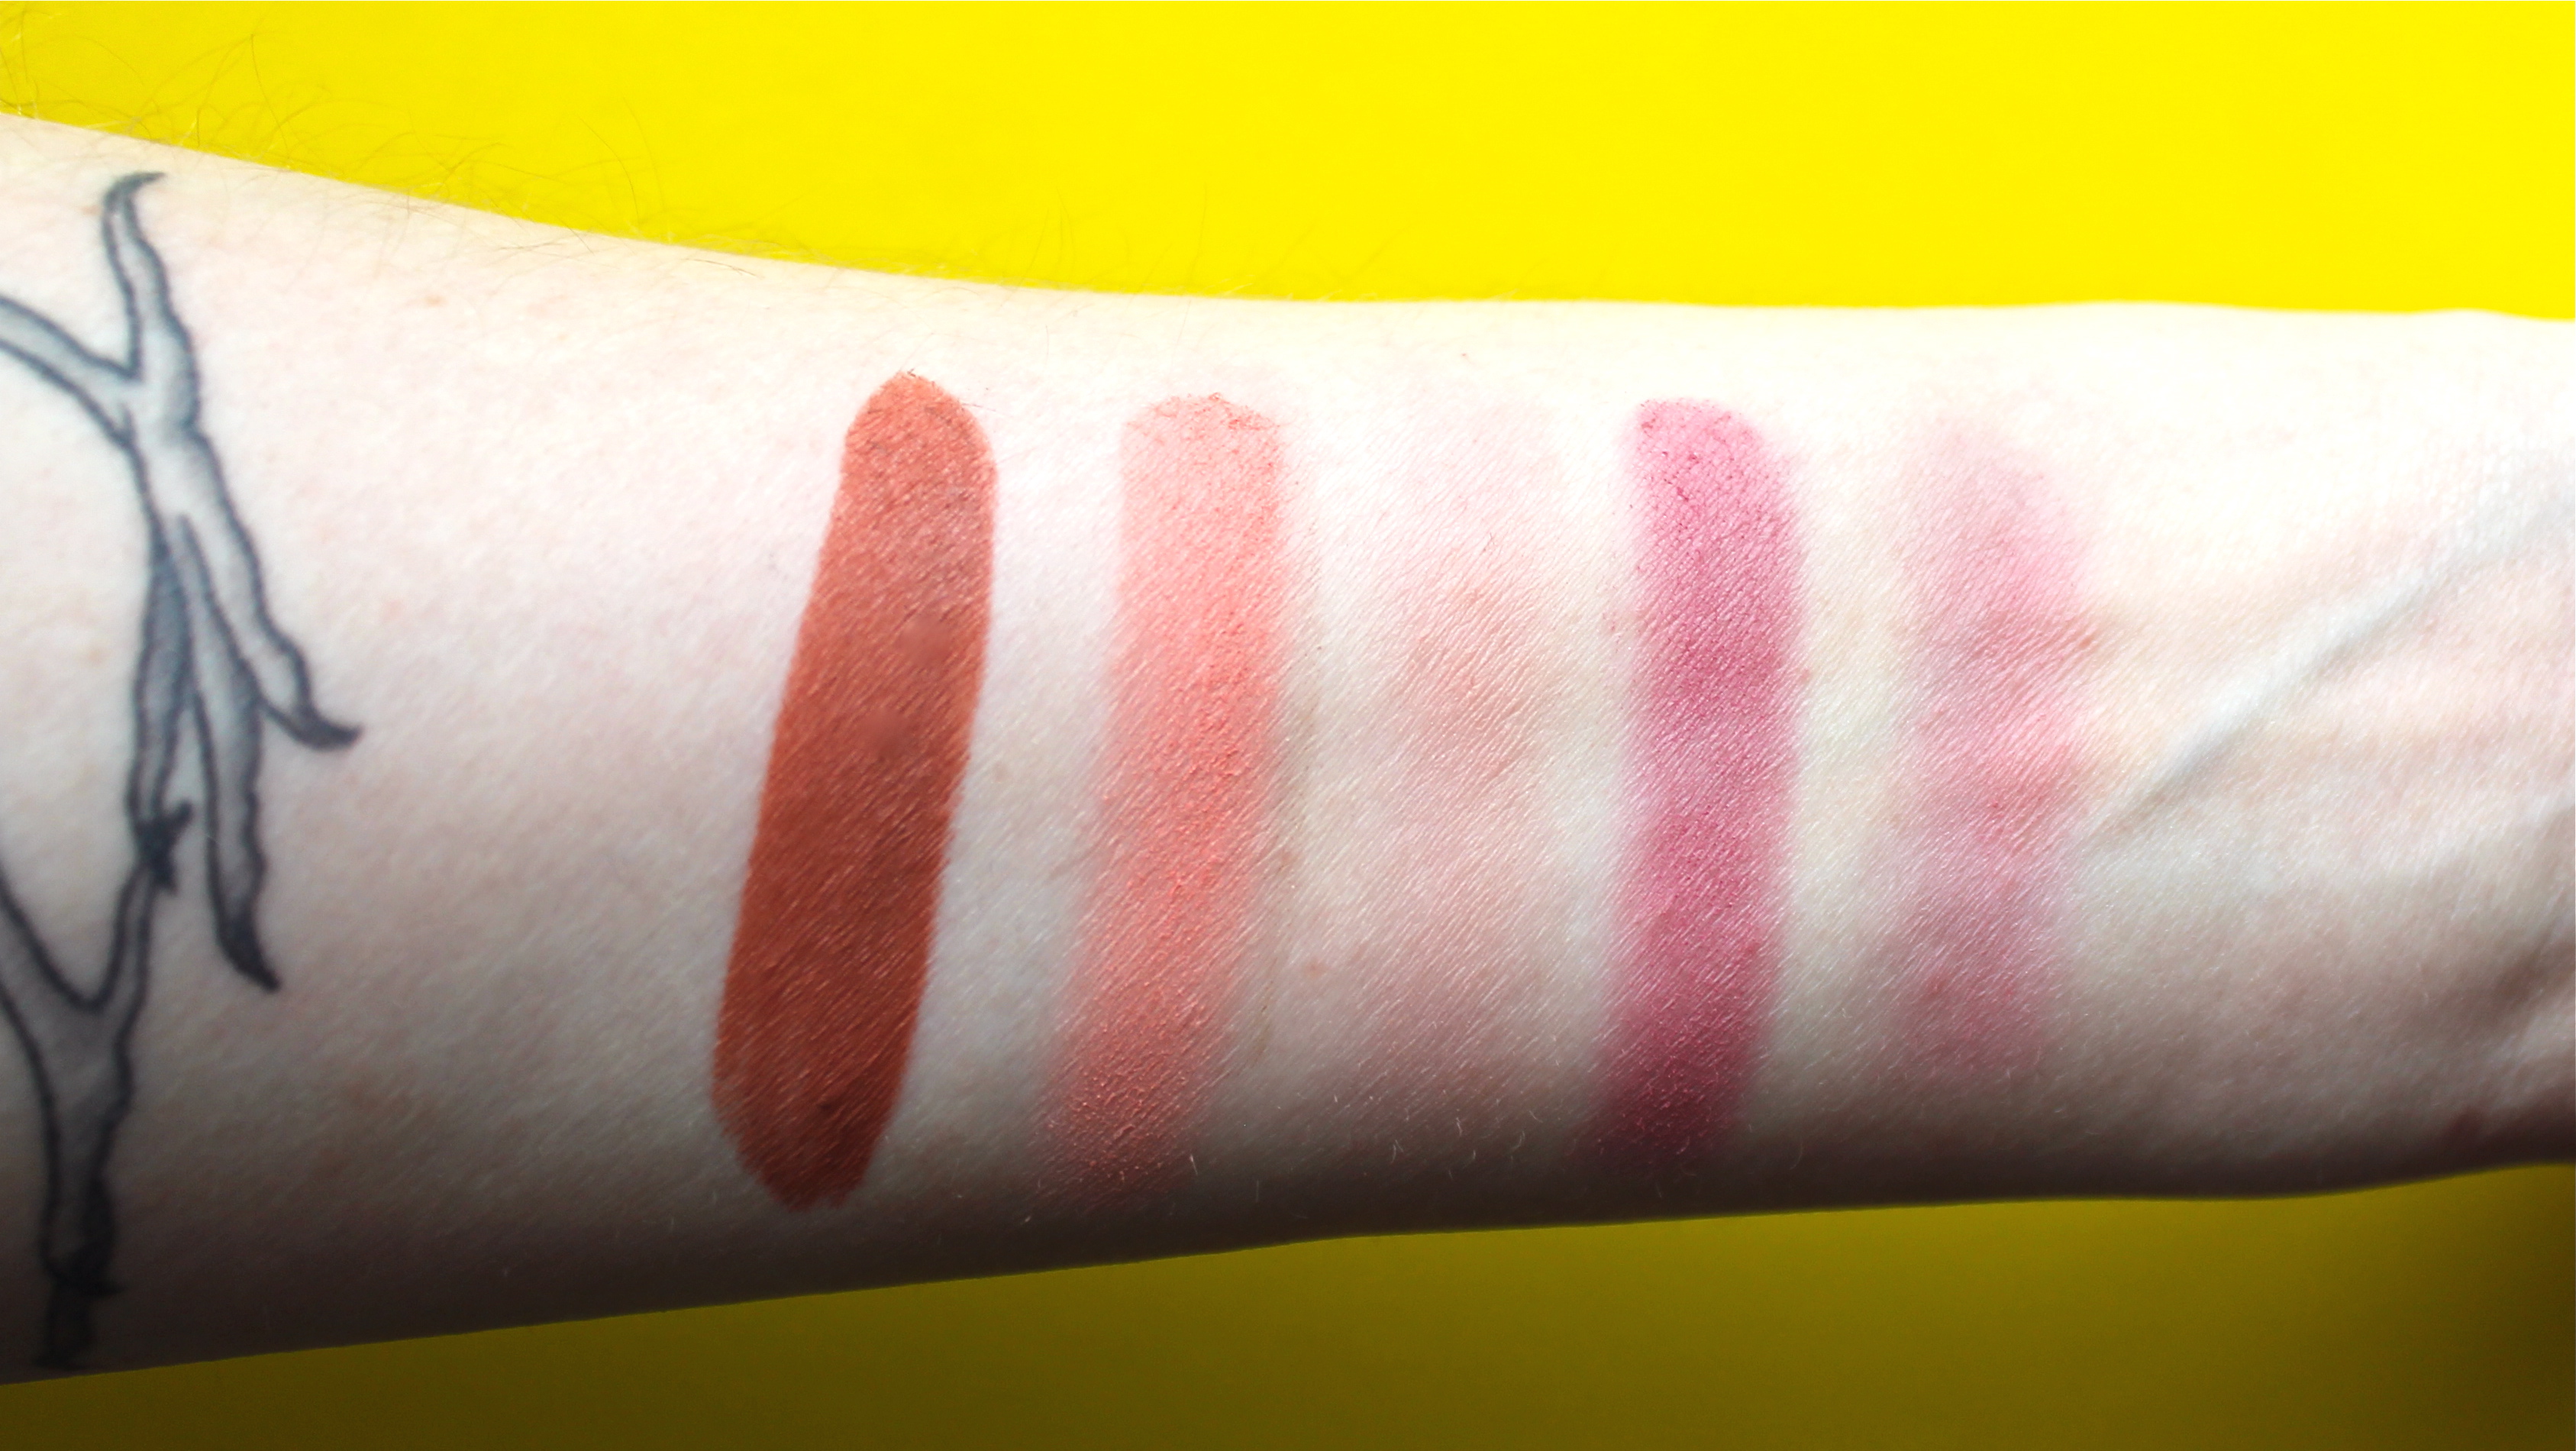 LORAC Color Source Blush and Alter Ego Lipstick